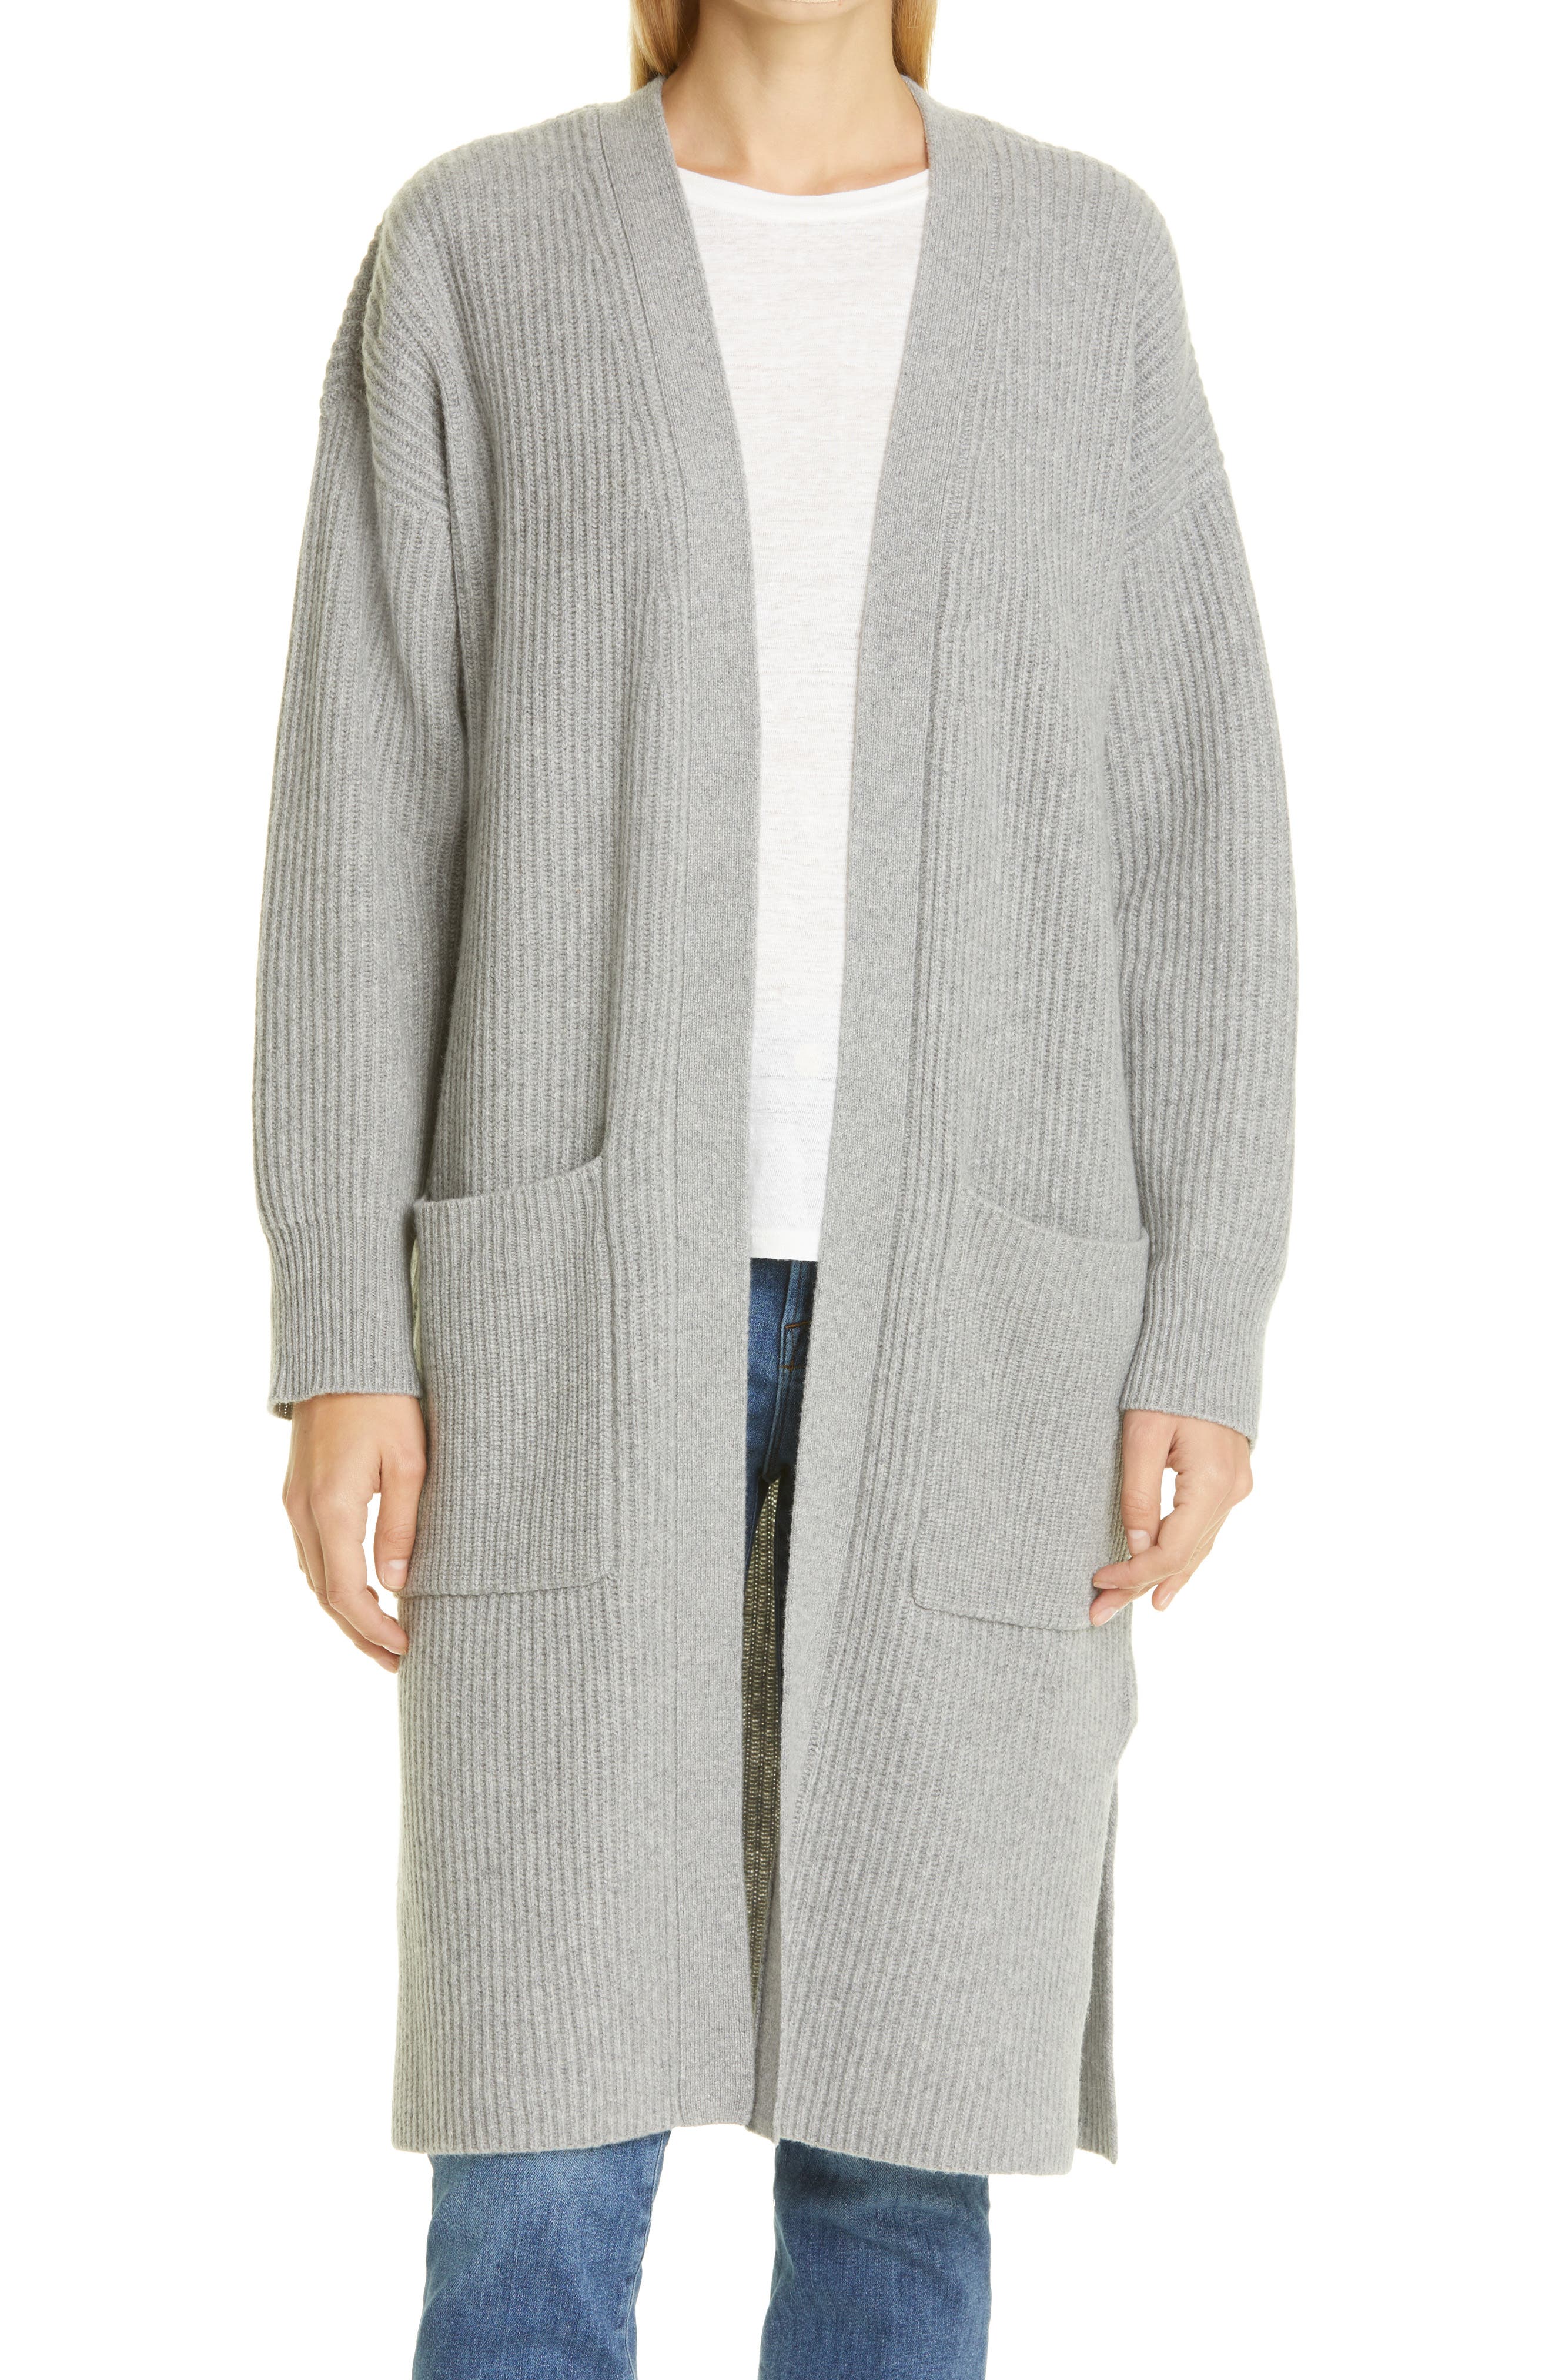 FRAME Double Pocket Cashmere Cardigan in Gris Heather at Nordstrom, Size Medium